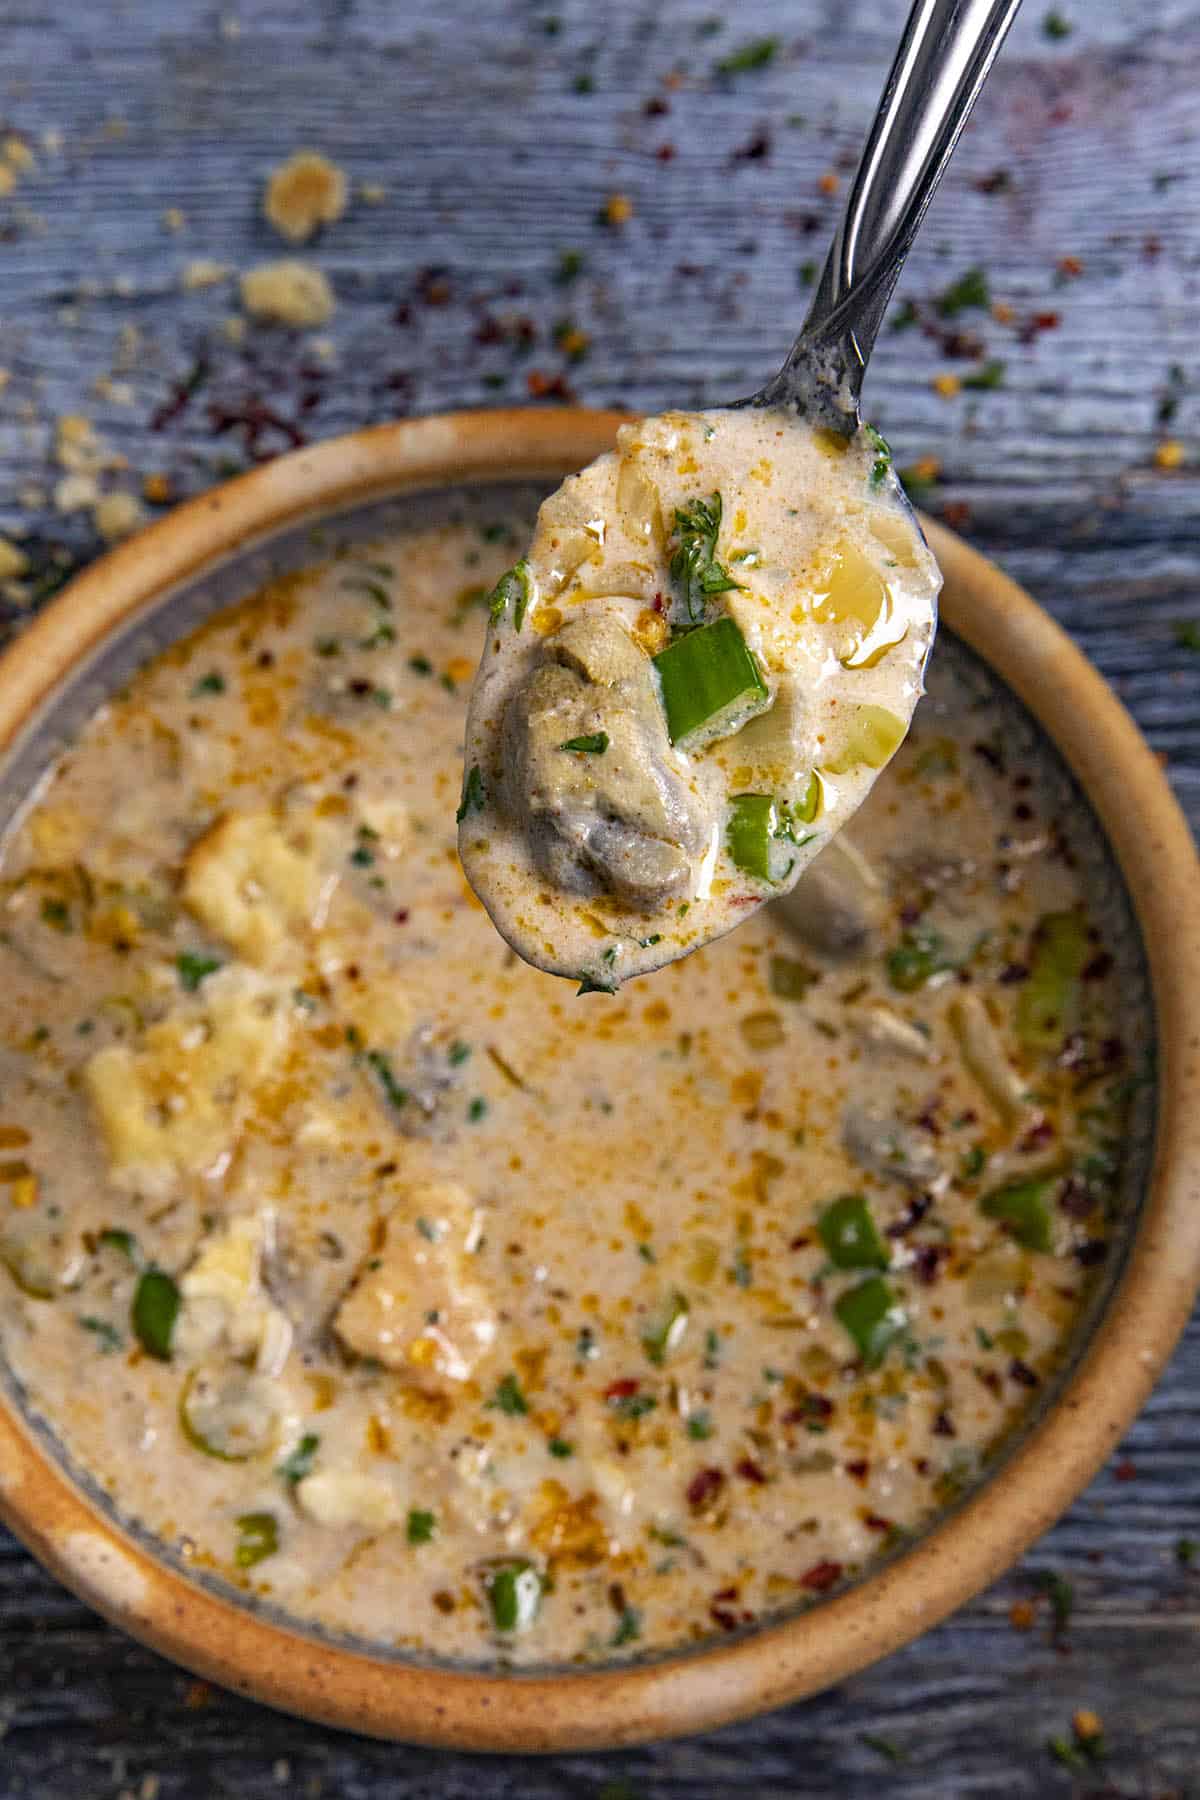 Oyster Stew on a spoon, ready to enjoy